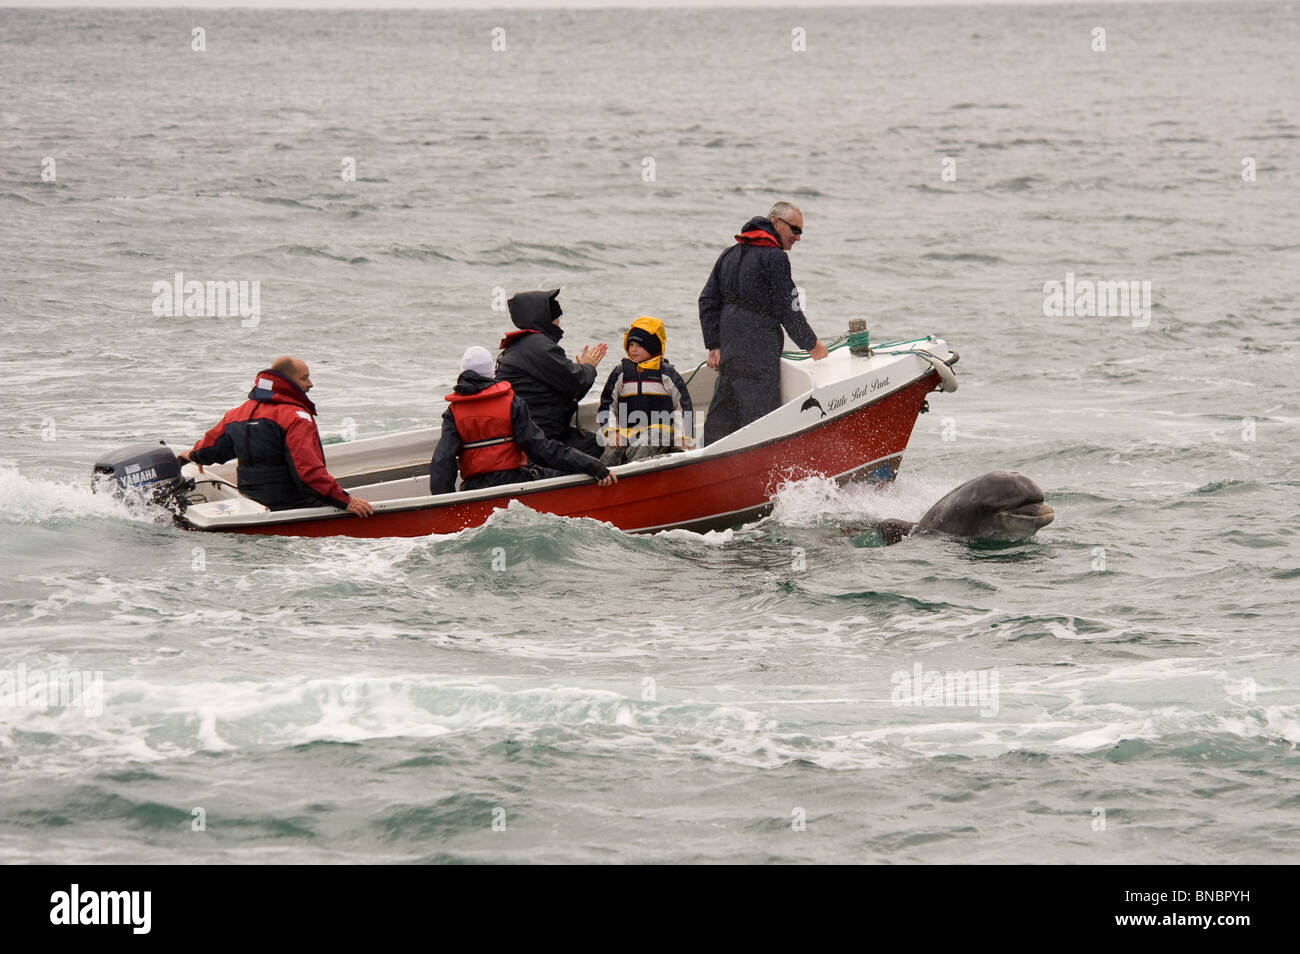 people on a small boat in Dingle bay, Ireland with Fungie the dolphin nearby Stock Photo